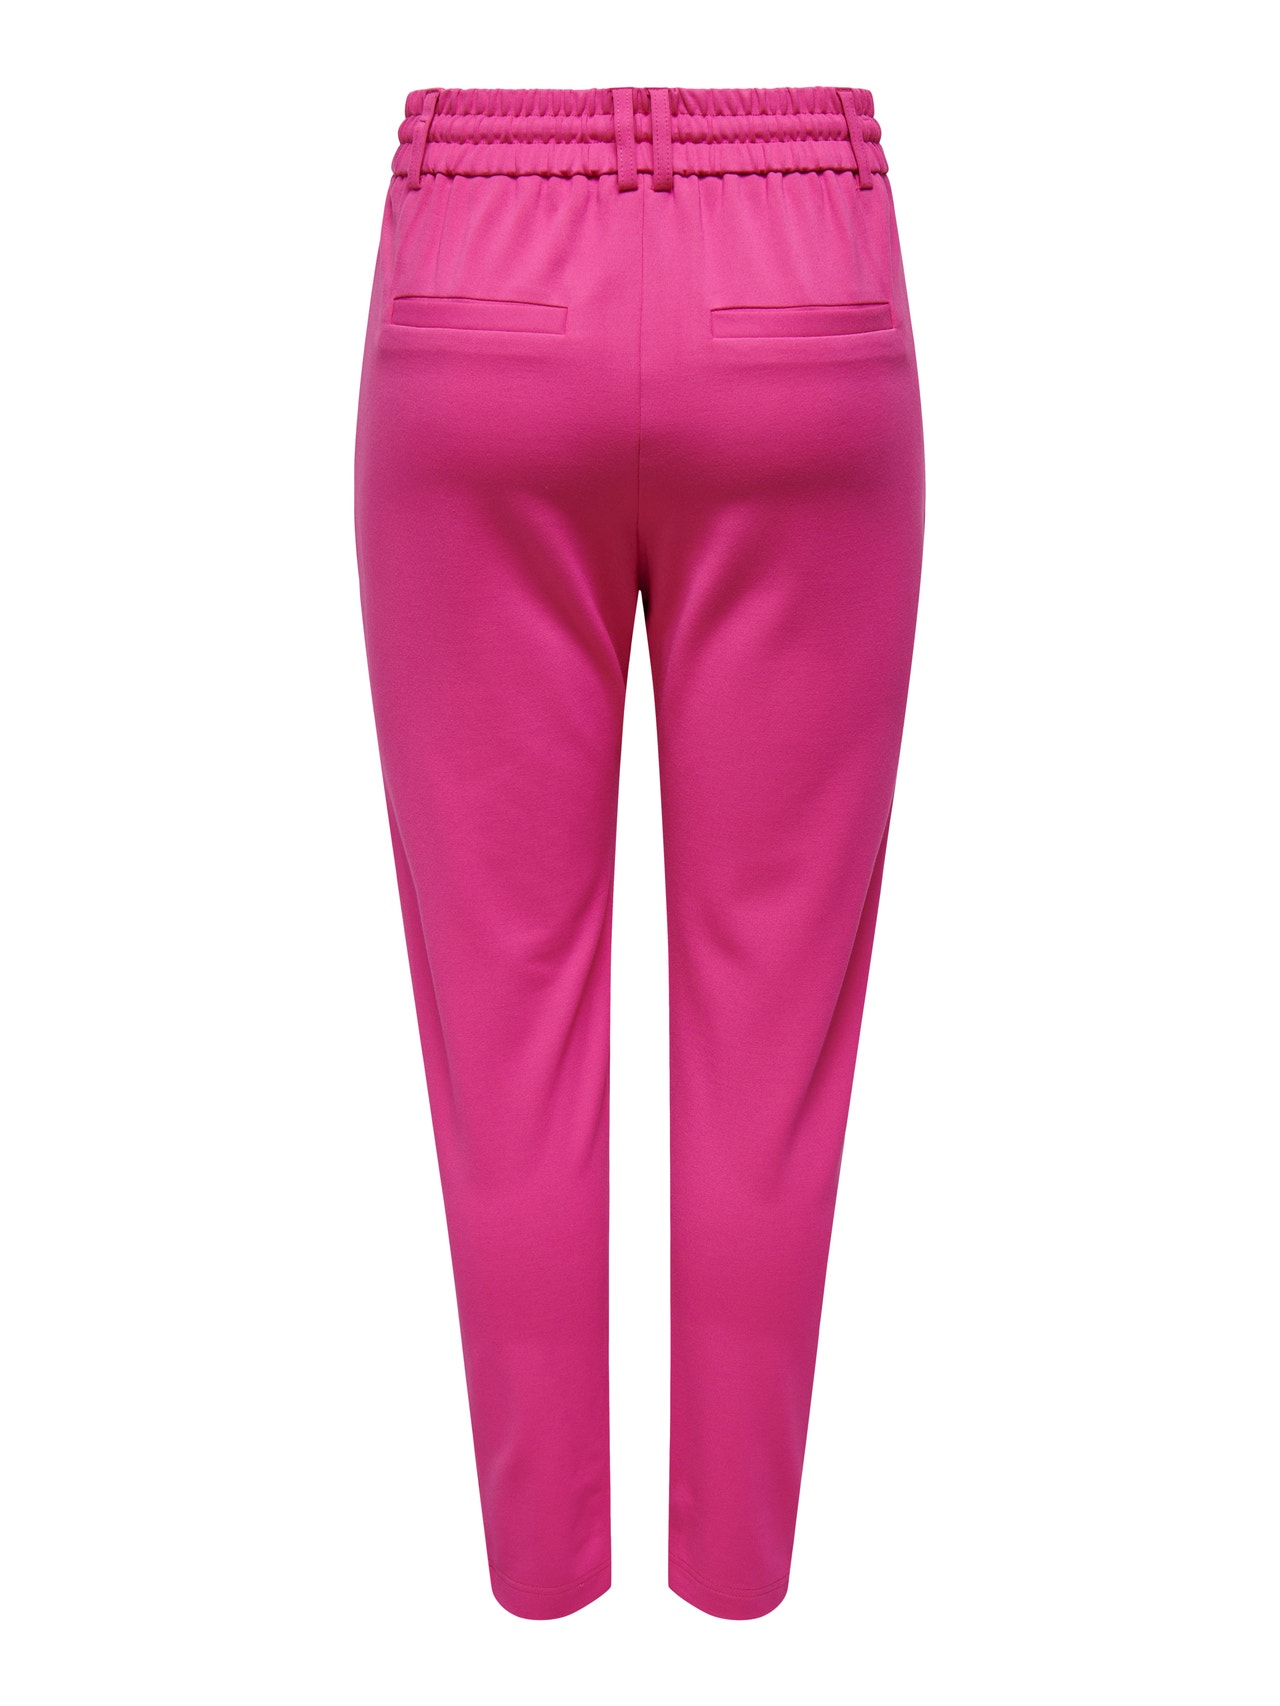 ONLY Poptrash Trousers -Raspberry Rose - 15115847